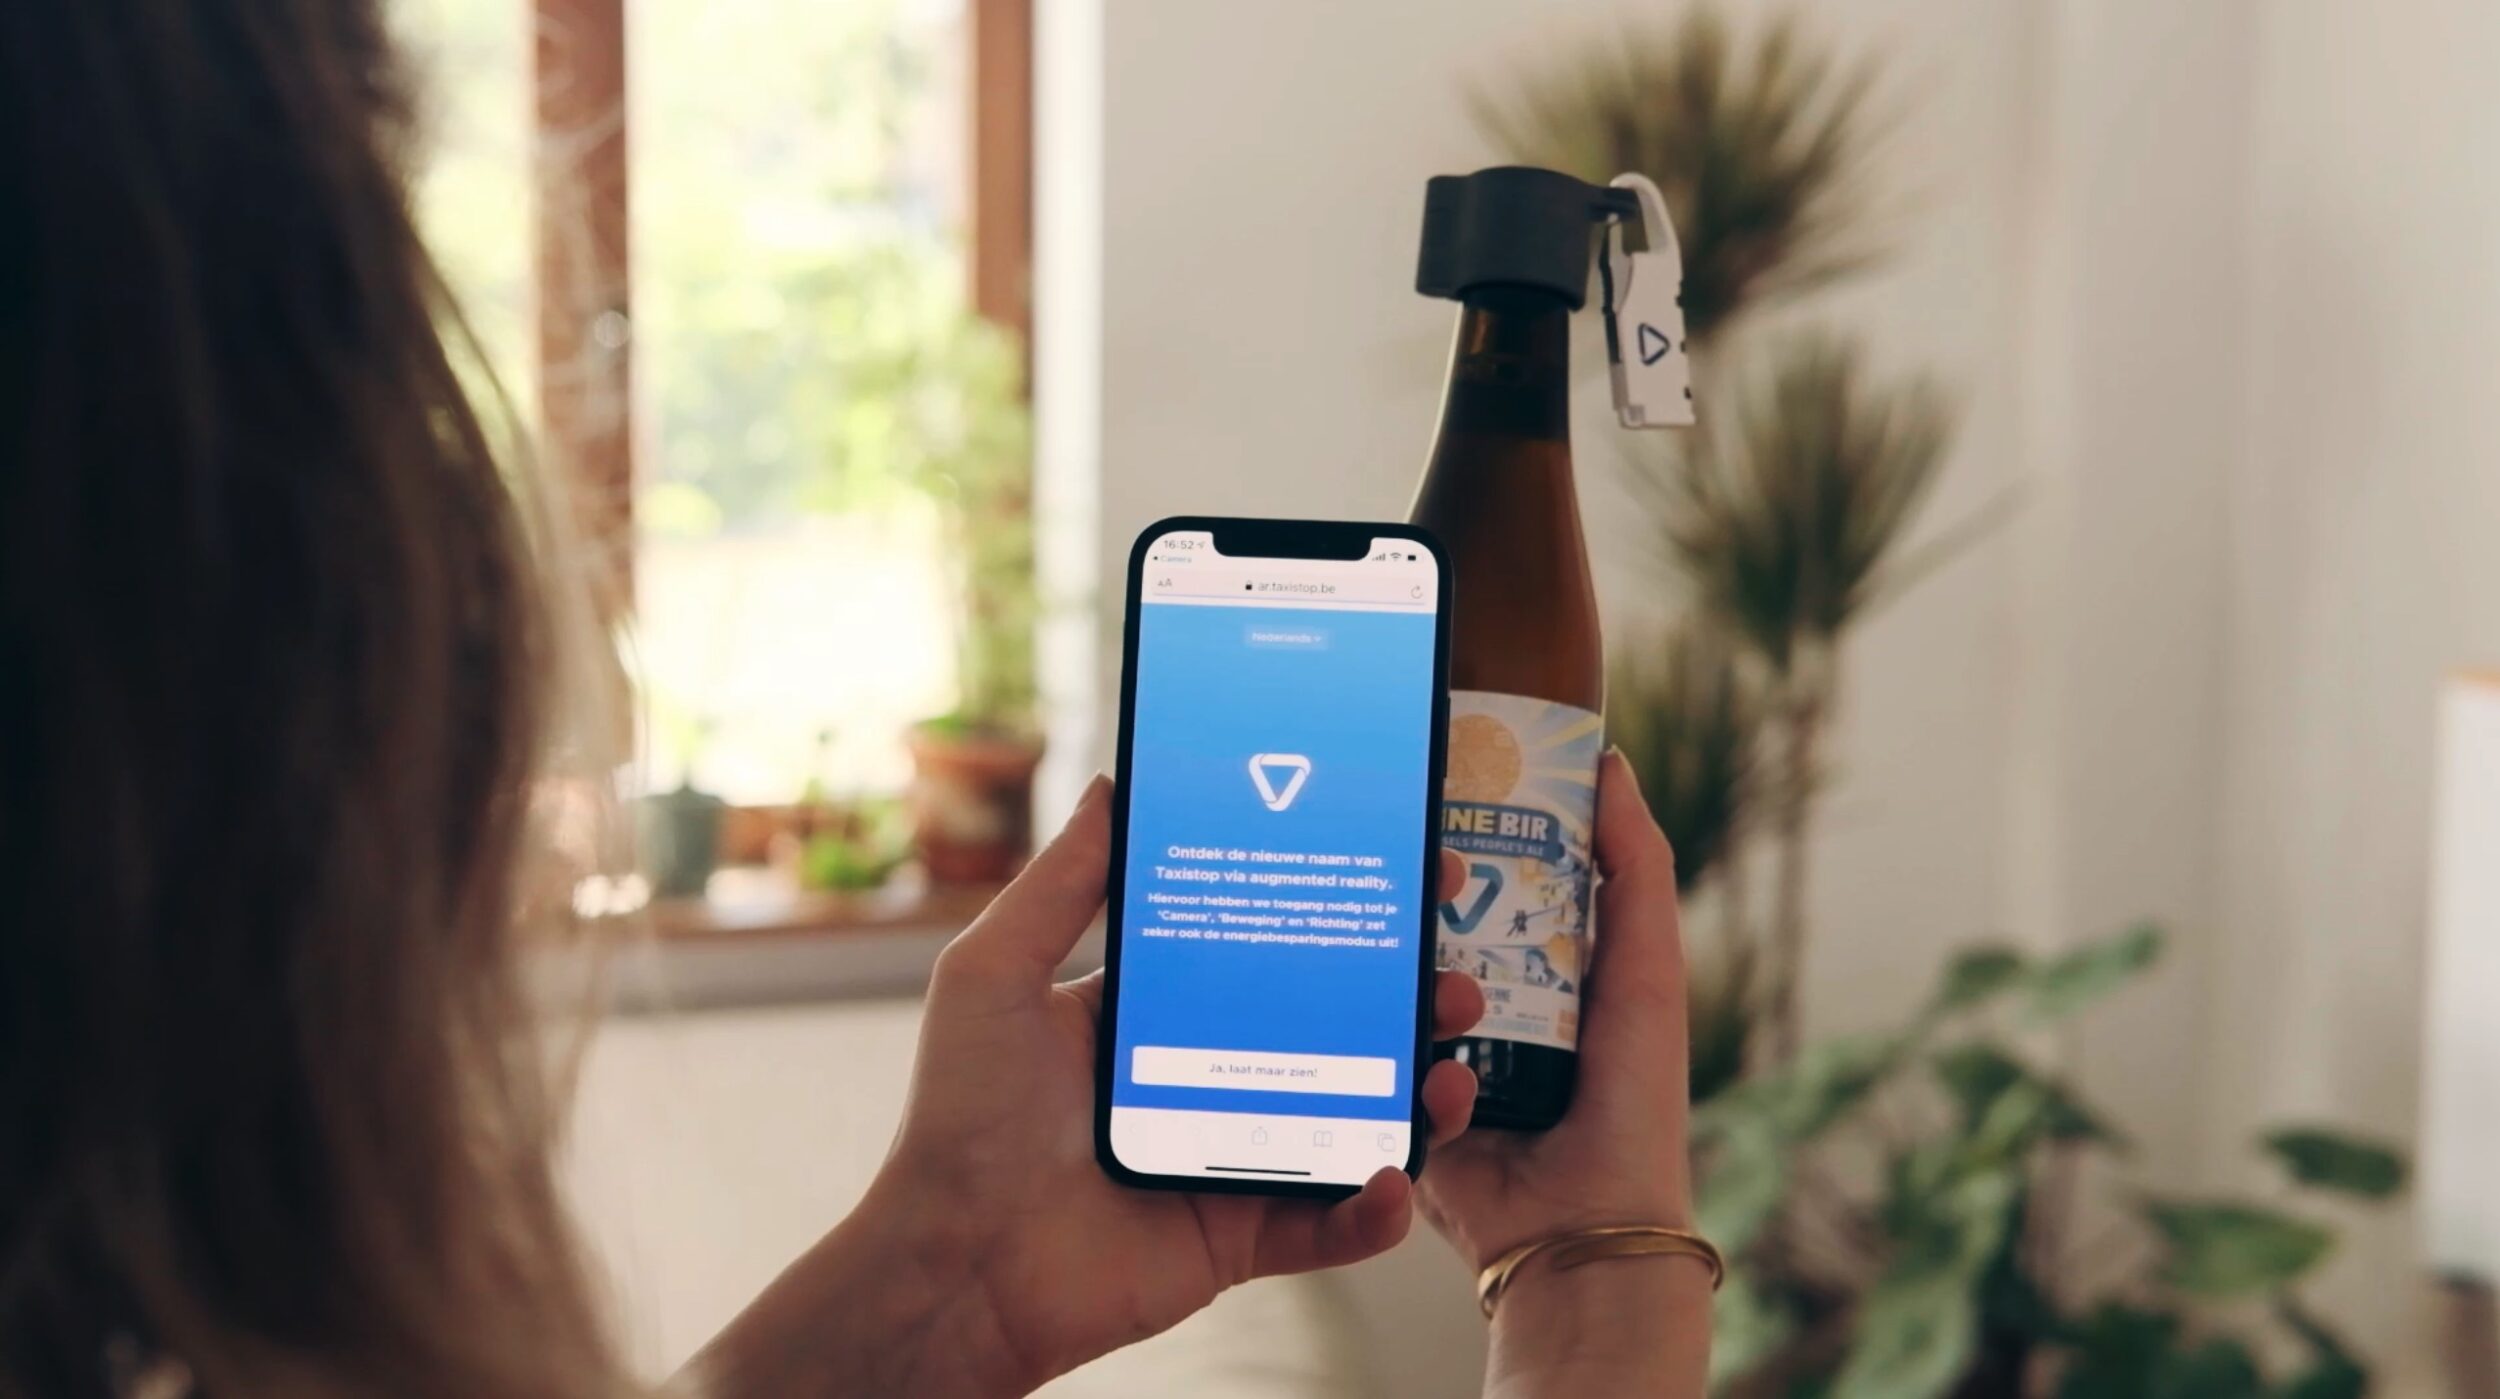 Seeing double: transforming Taxistop into Mpact through augmented reality on a bottle